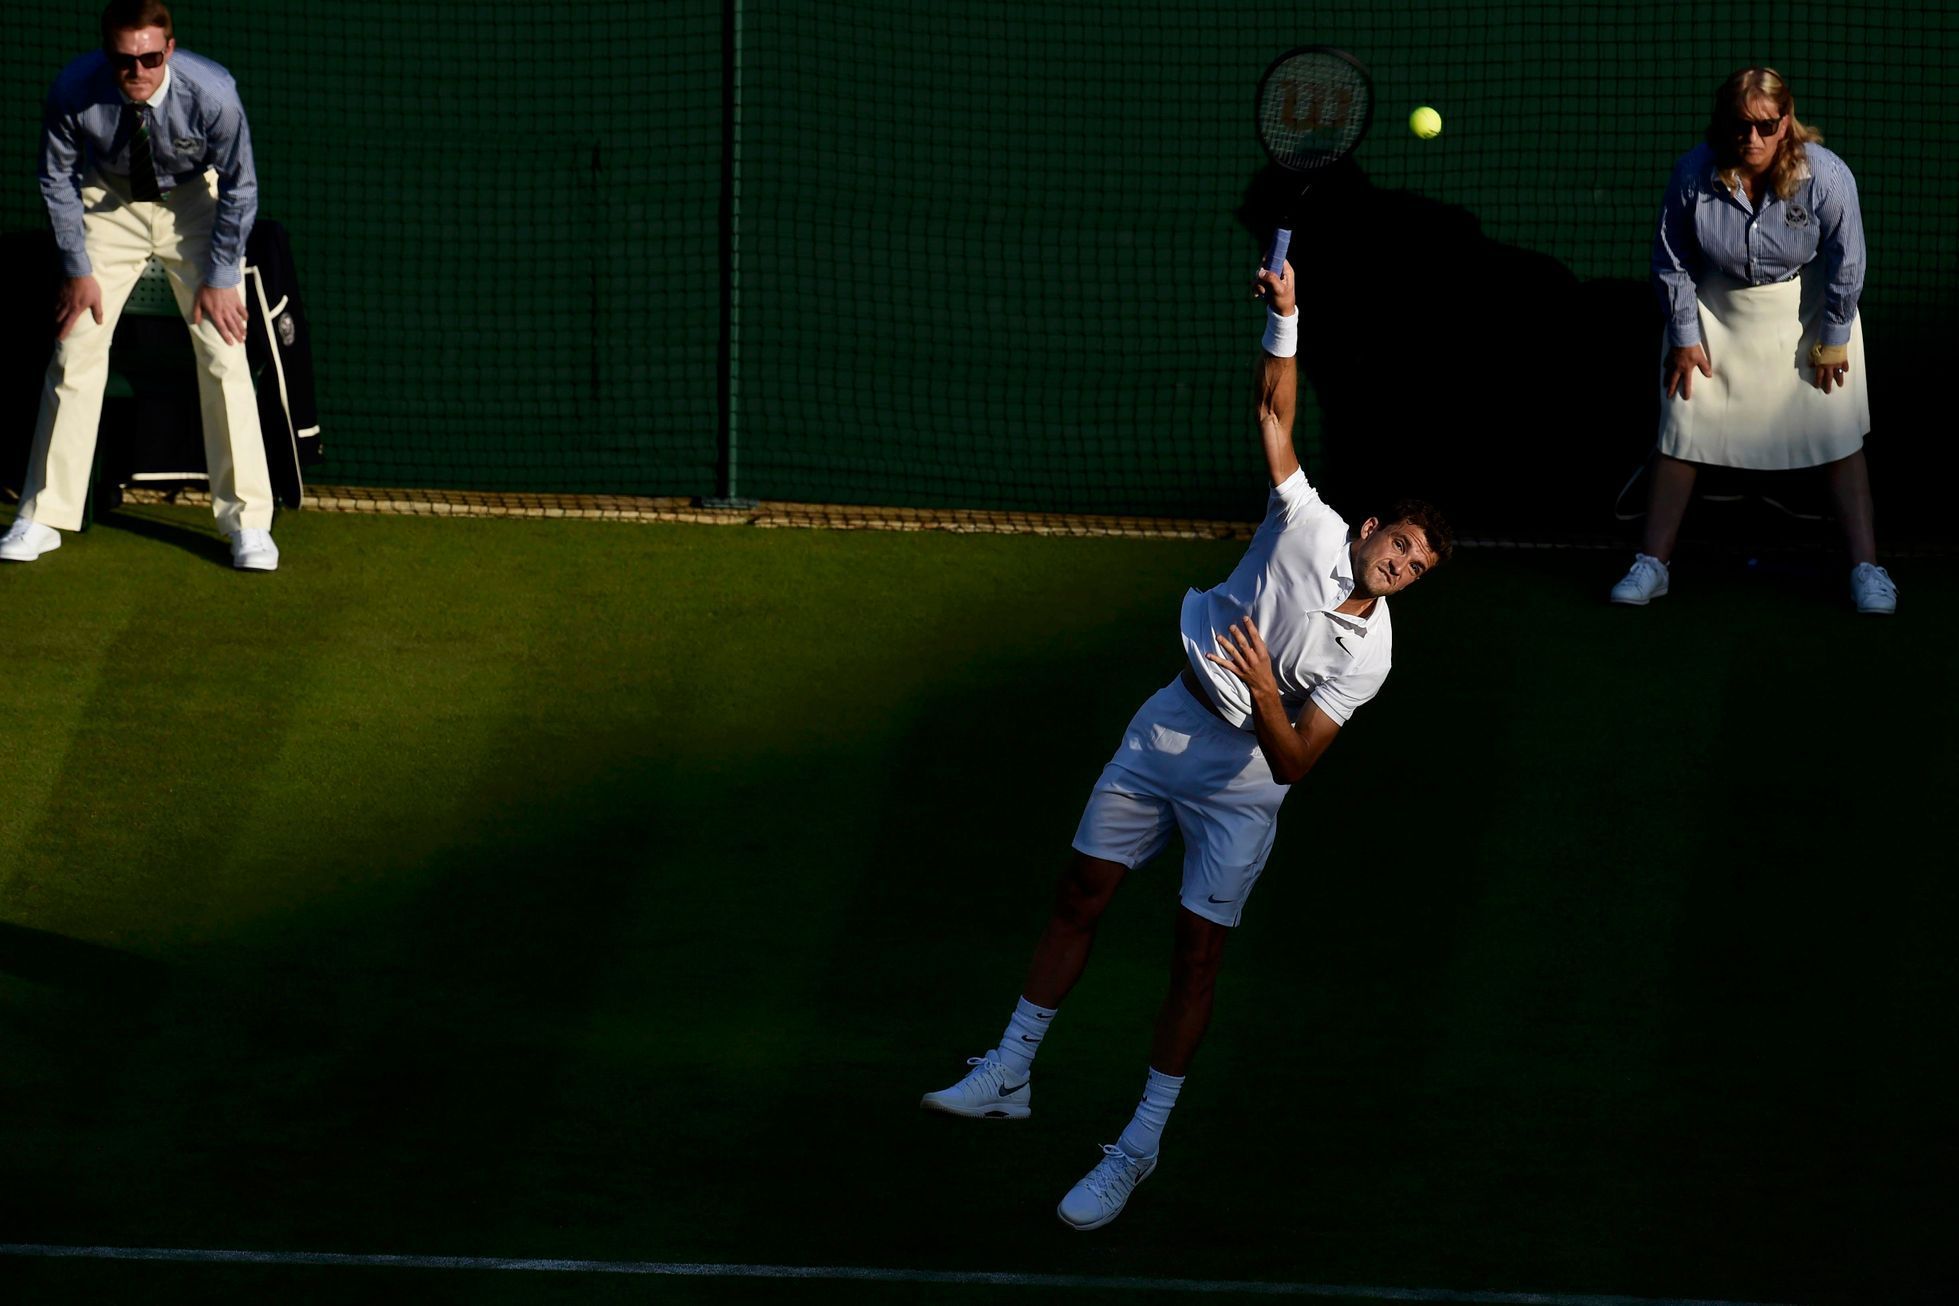 Grigor Dimitrov of Bulgaria serves during his match against Federico Delbonis of Argentina at the Wimbledon Tennis Championships in London